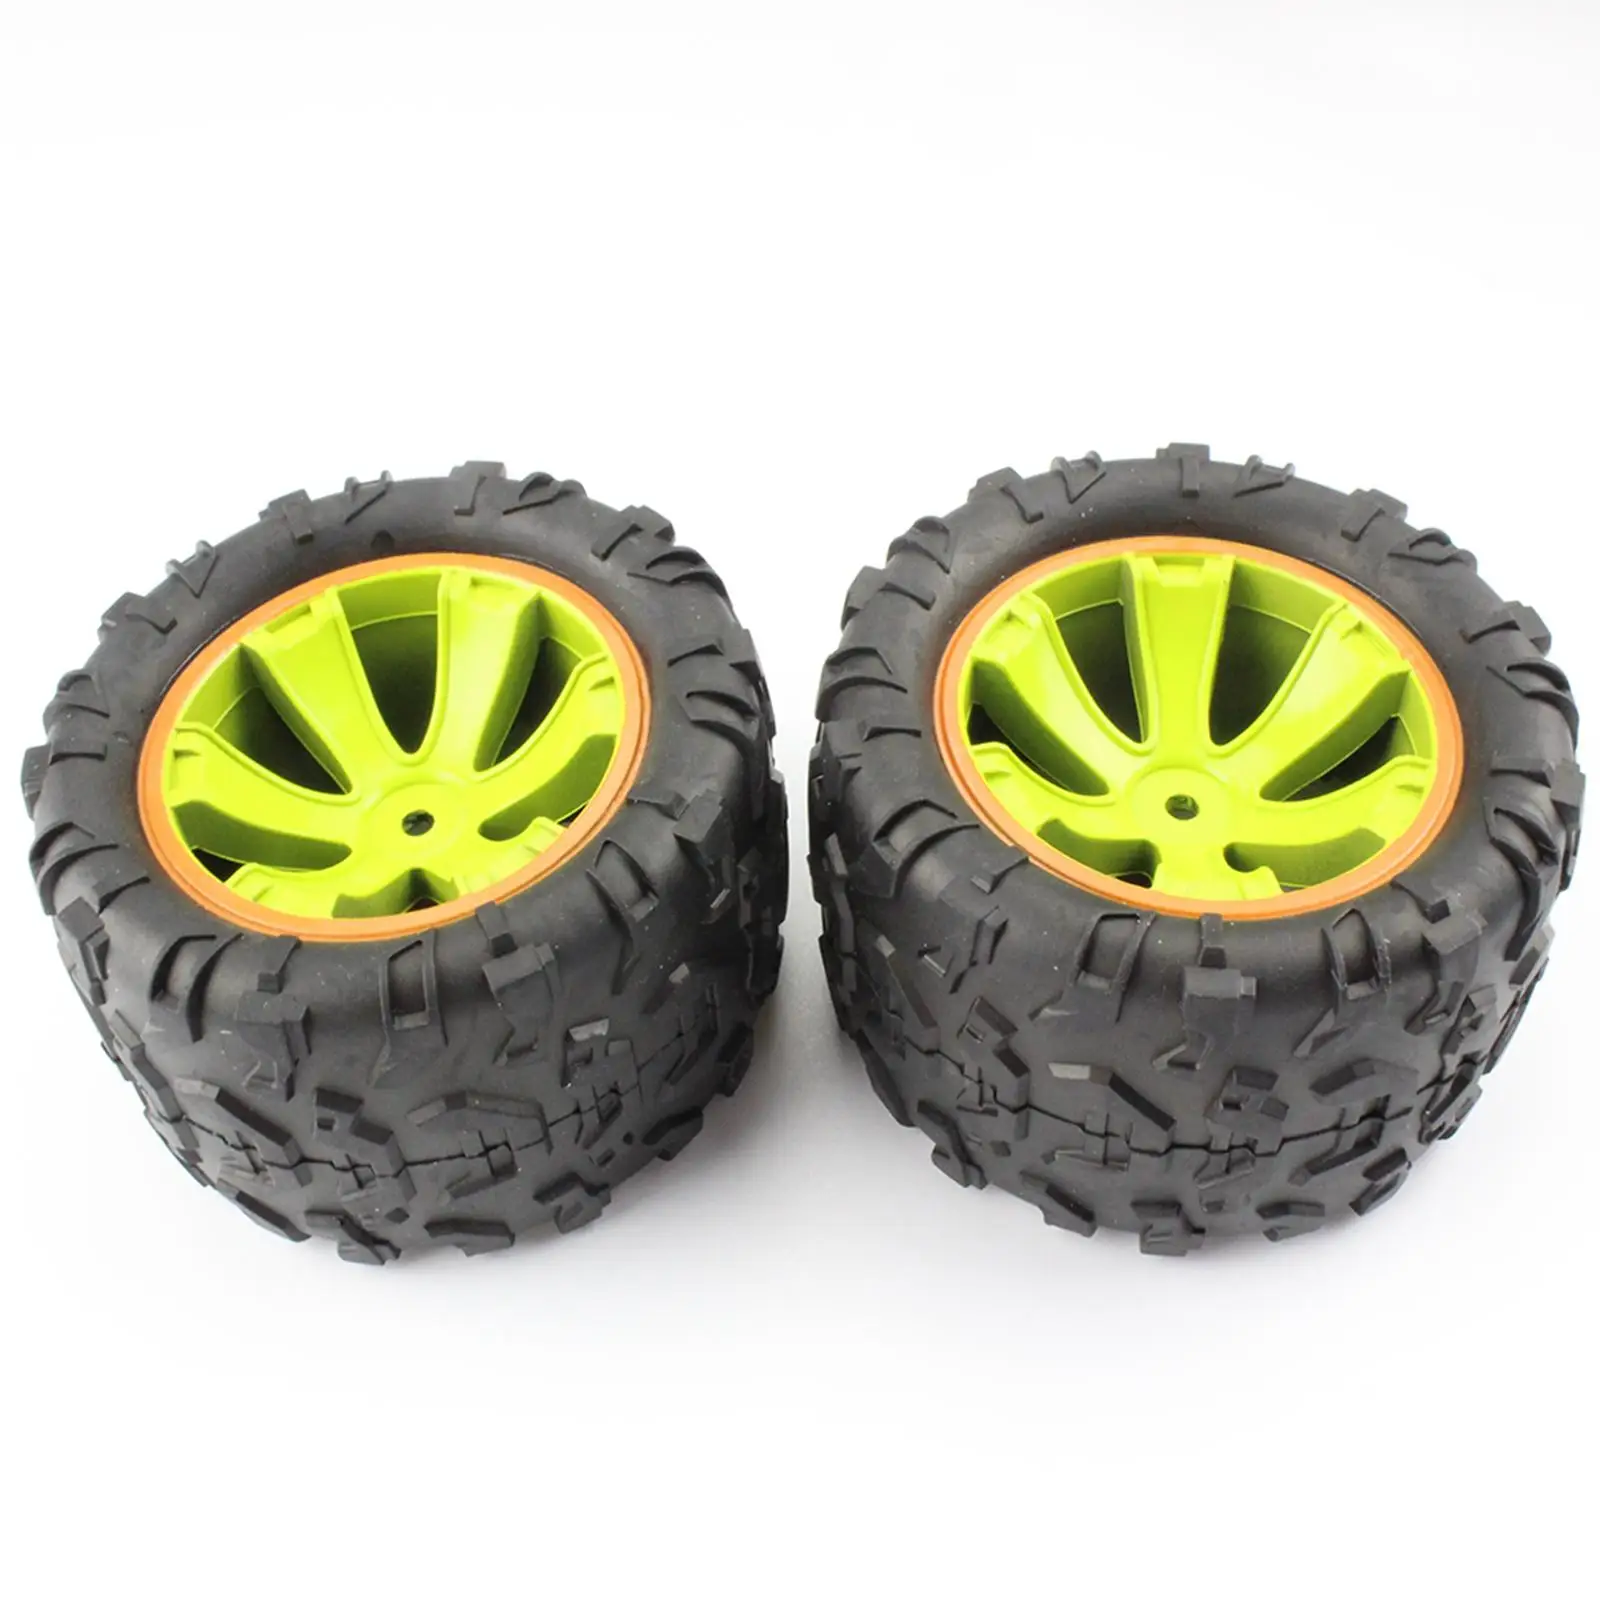 2Pcs High Quality Wheel for Wltoys 144002 Remote Control Vehicle Spare Parts Replacement